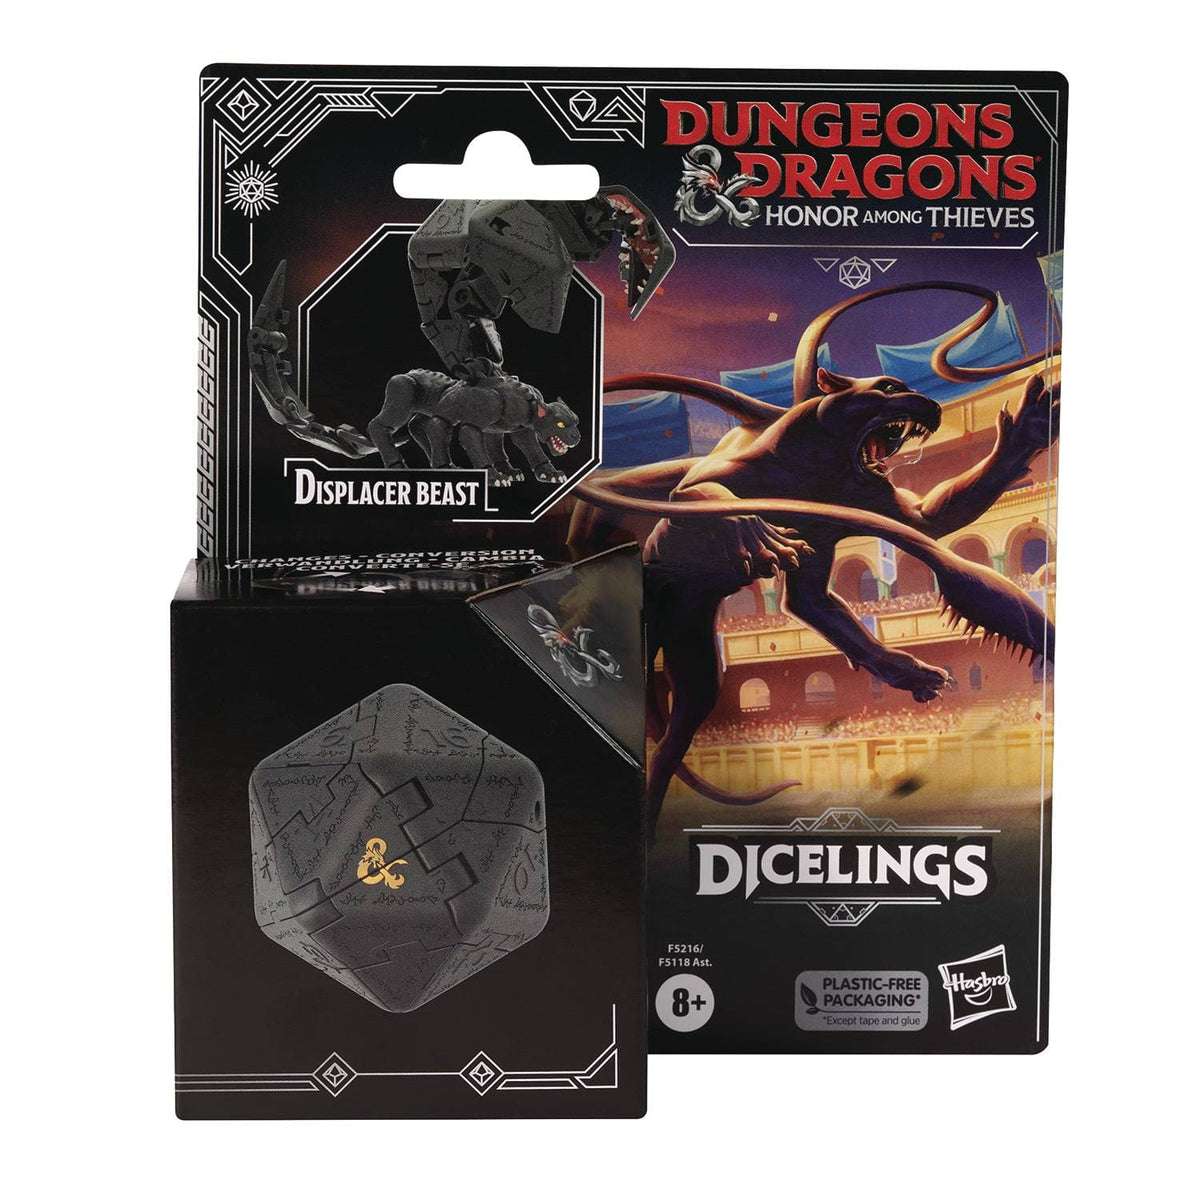 Hasbro: Dungeons & Dragons - Dicelings, Displacer Beast (Honor Among Thieves)